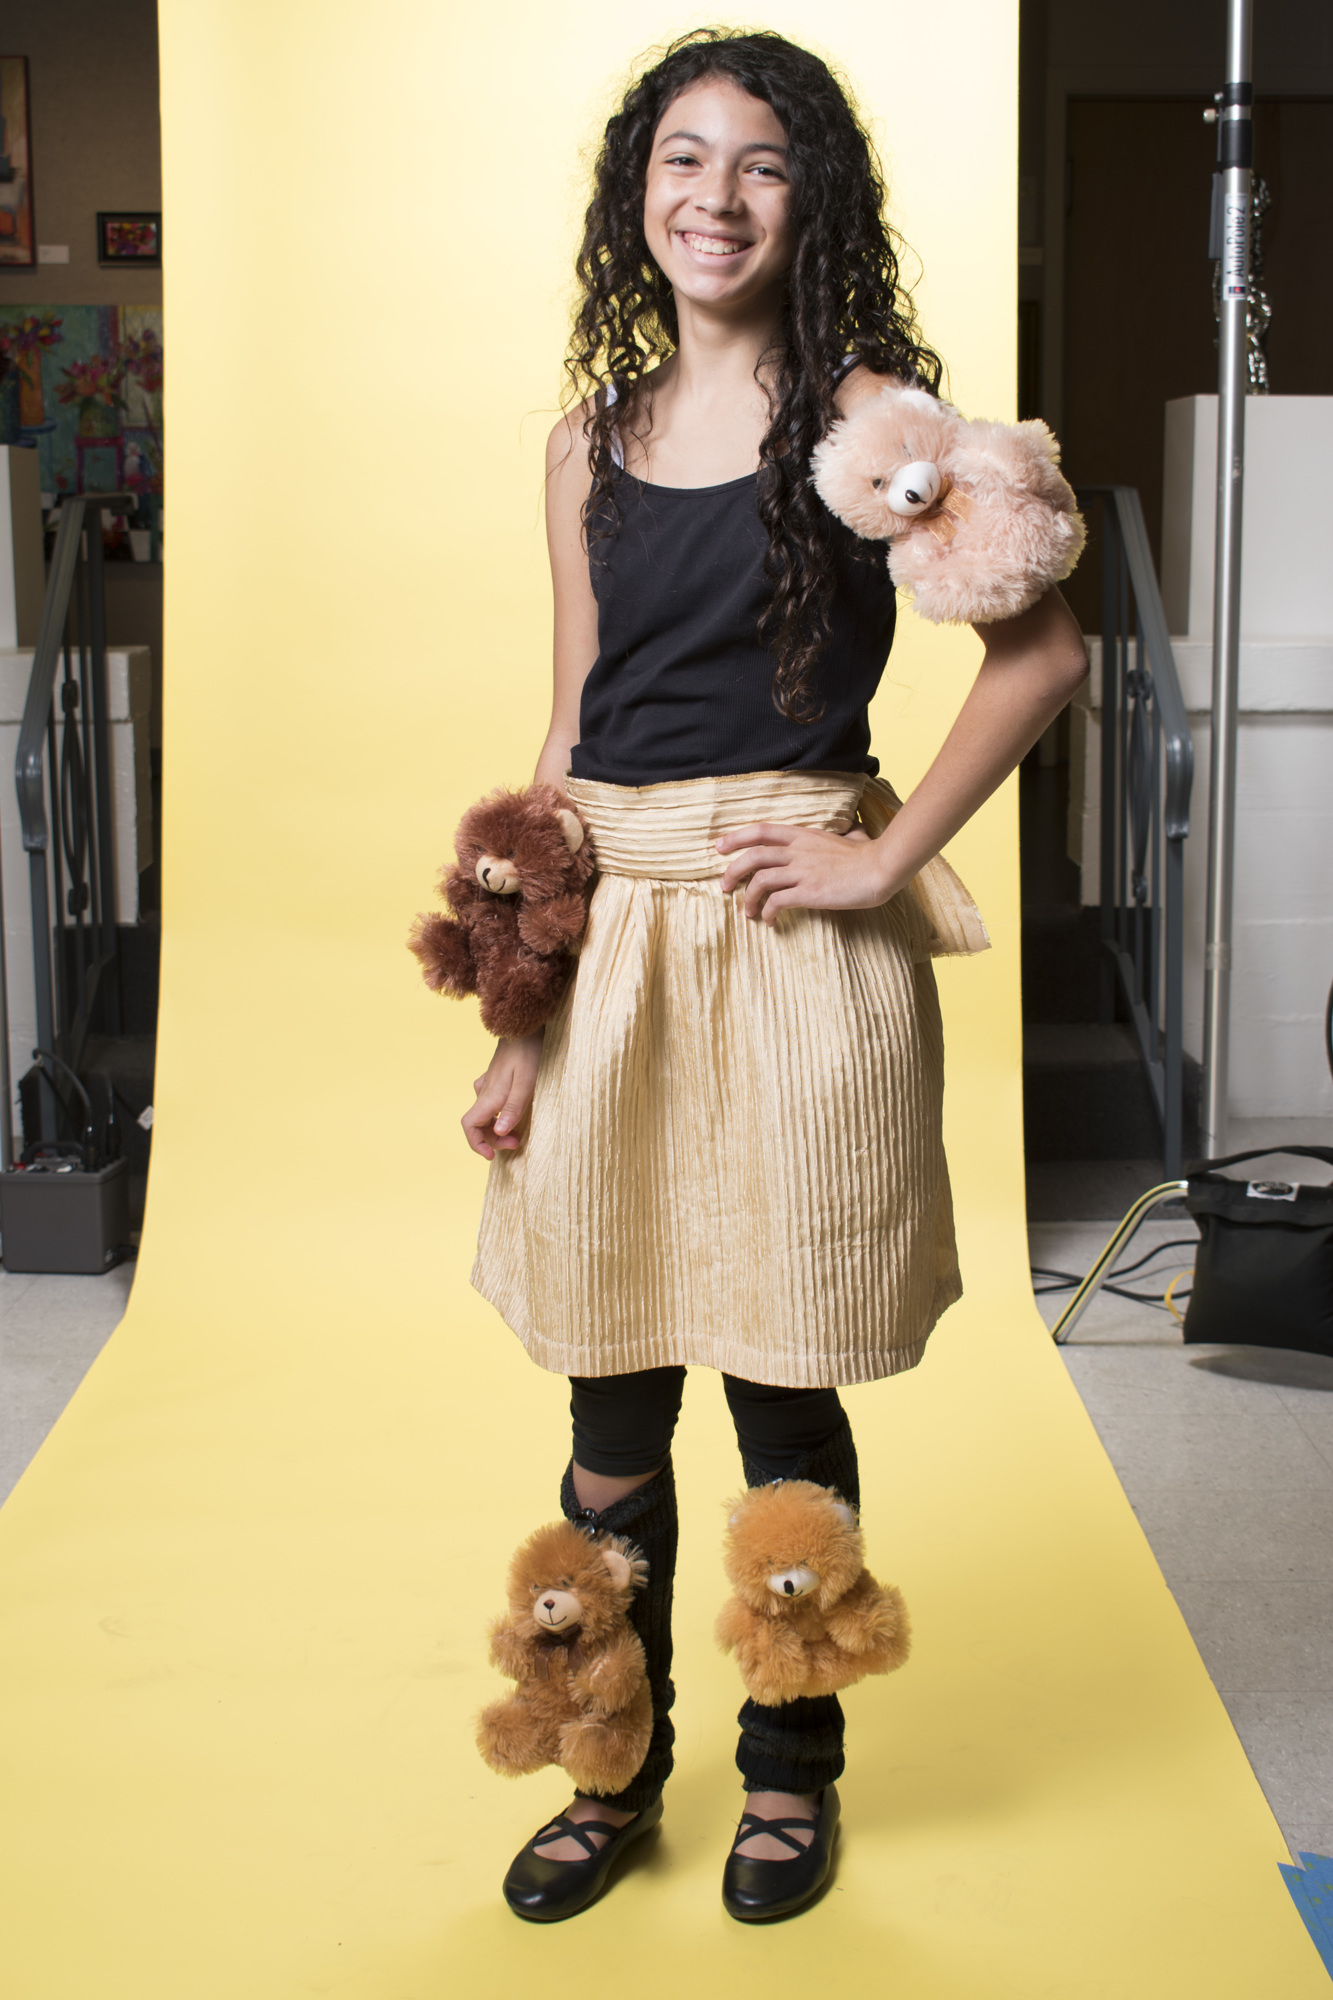 Ava Abreu’s iconcept jr. outfit is covered in stuffed bears attached with rubber bands. Photo by Niki Kottmann